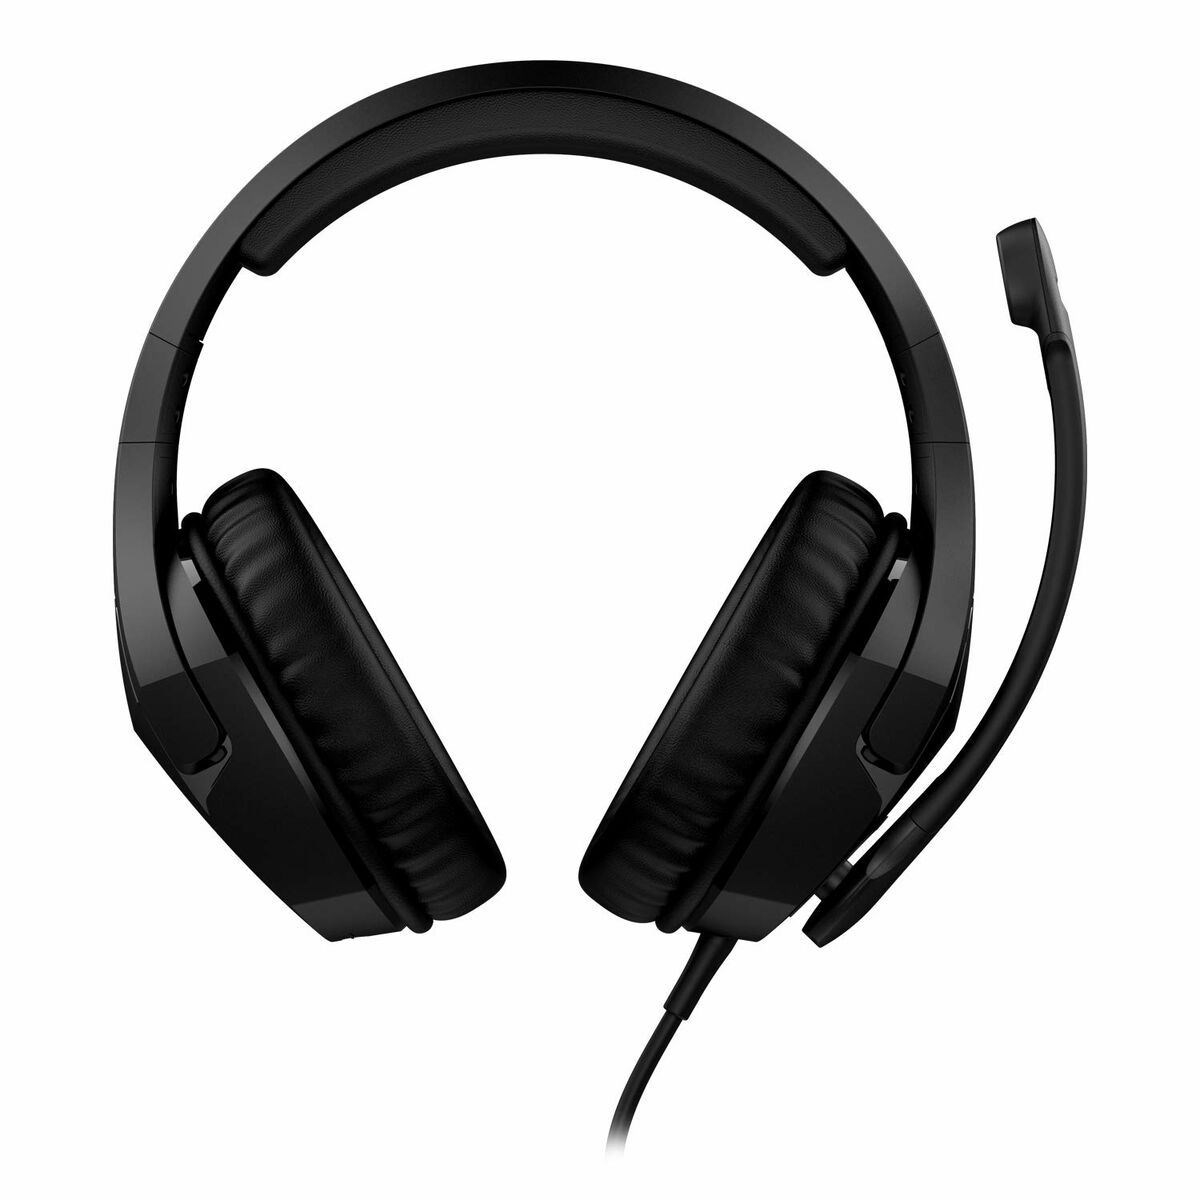 HYPERX CLOUD STINGER S 7.1 GAMING HEADSET FOR PC